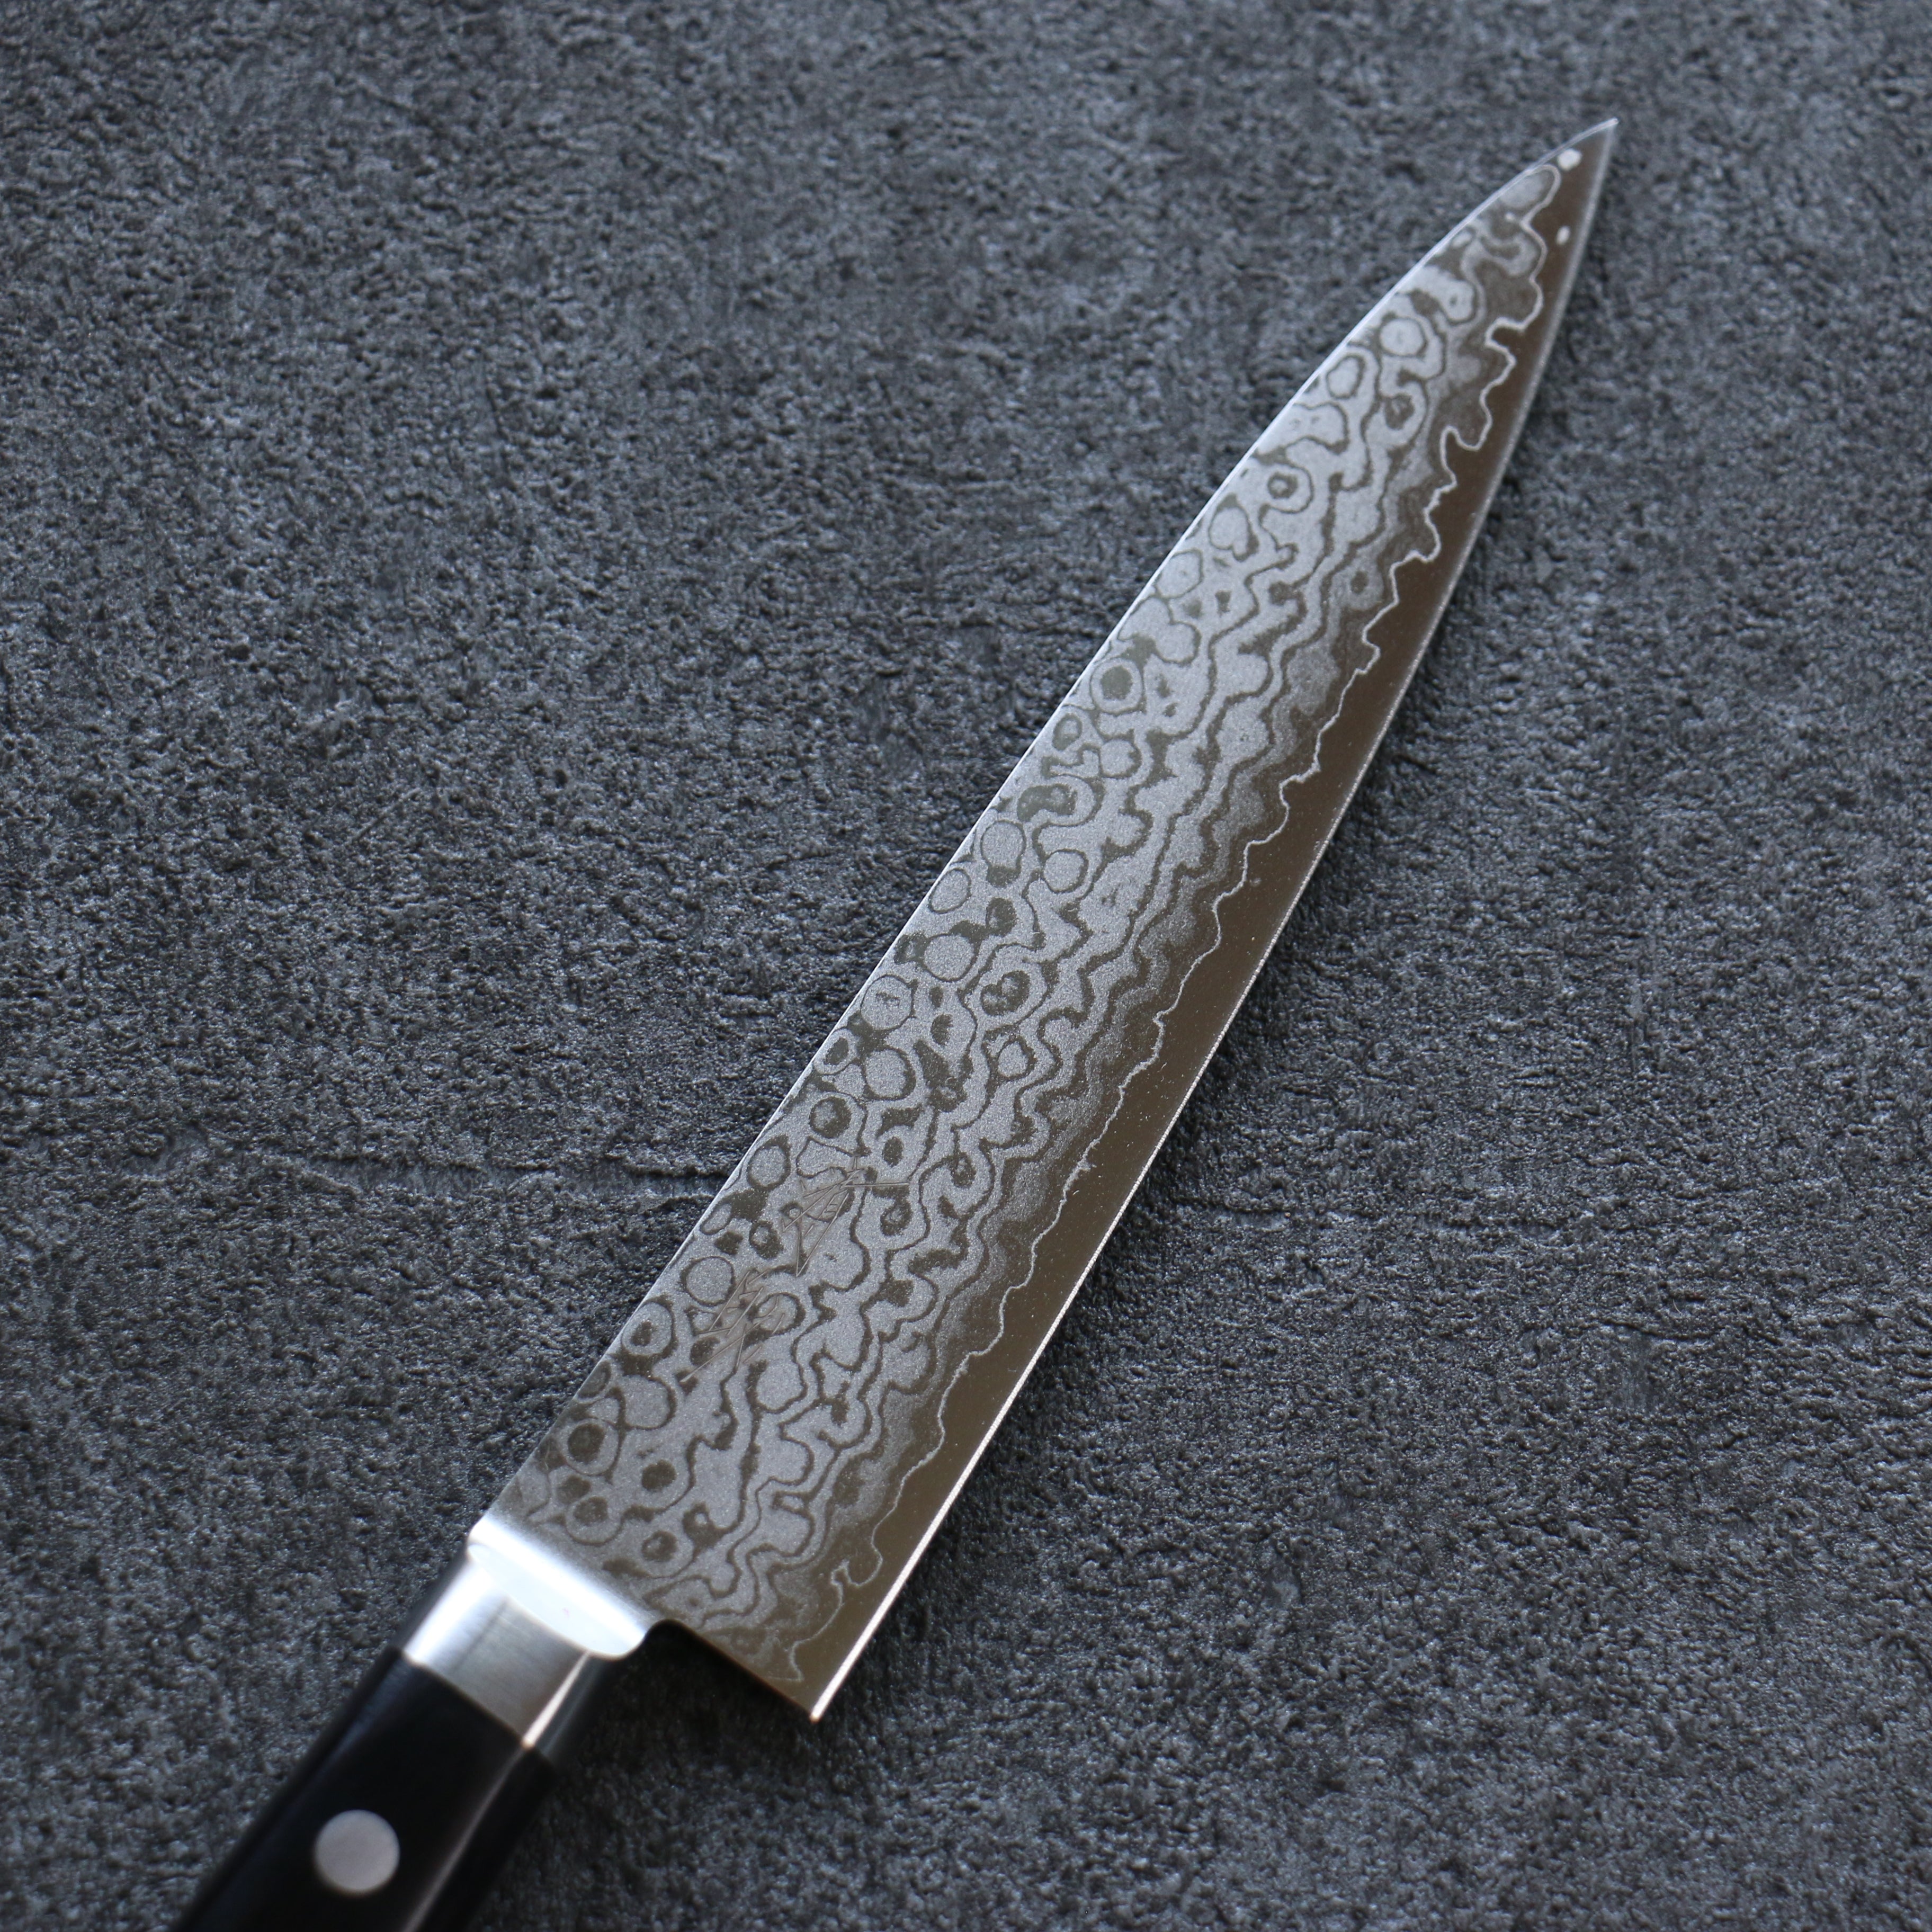 Japanese Knife Steel Types, Buying Guide